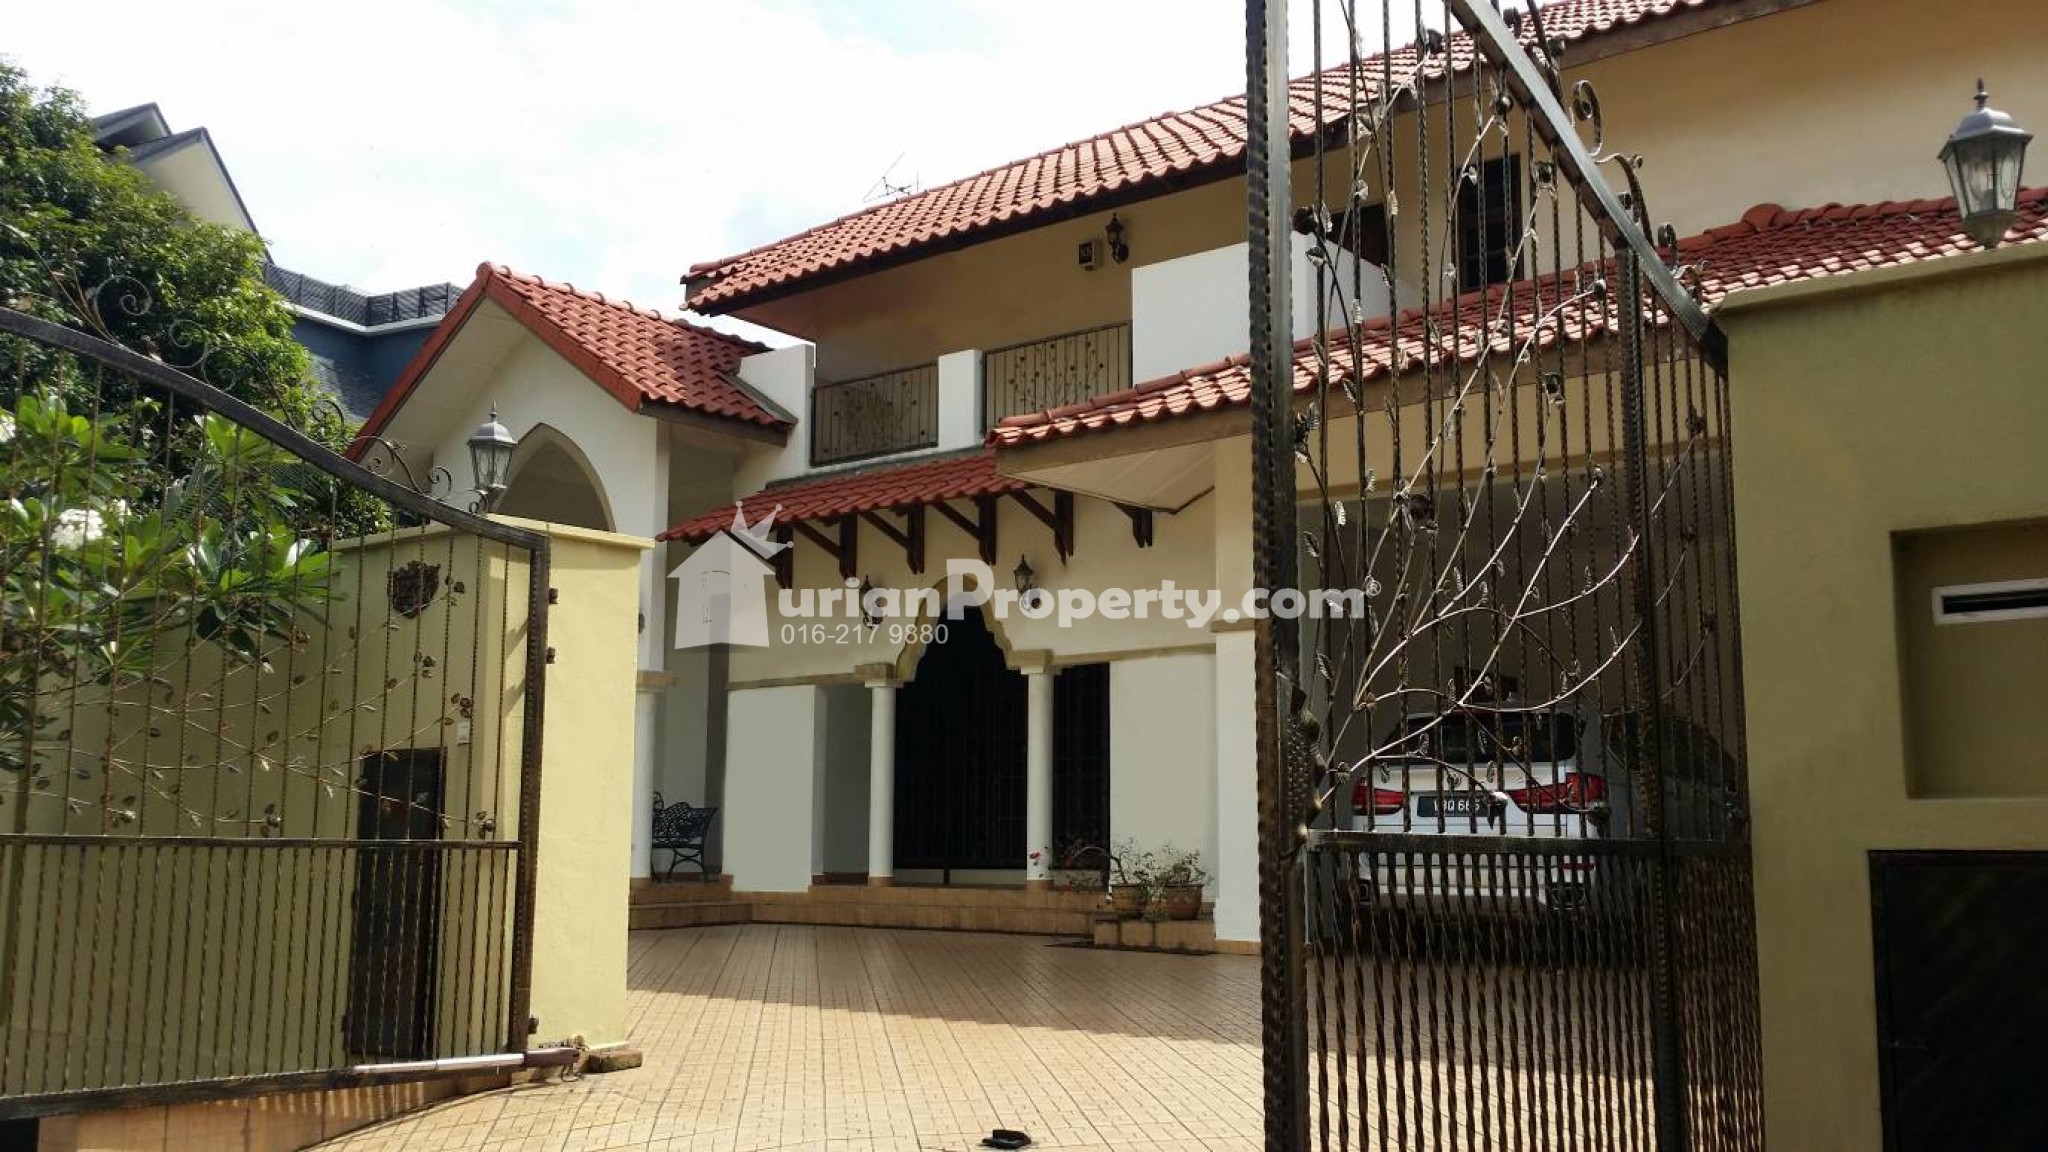 Bungalow House For Sale at Section 7